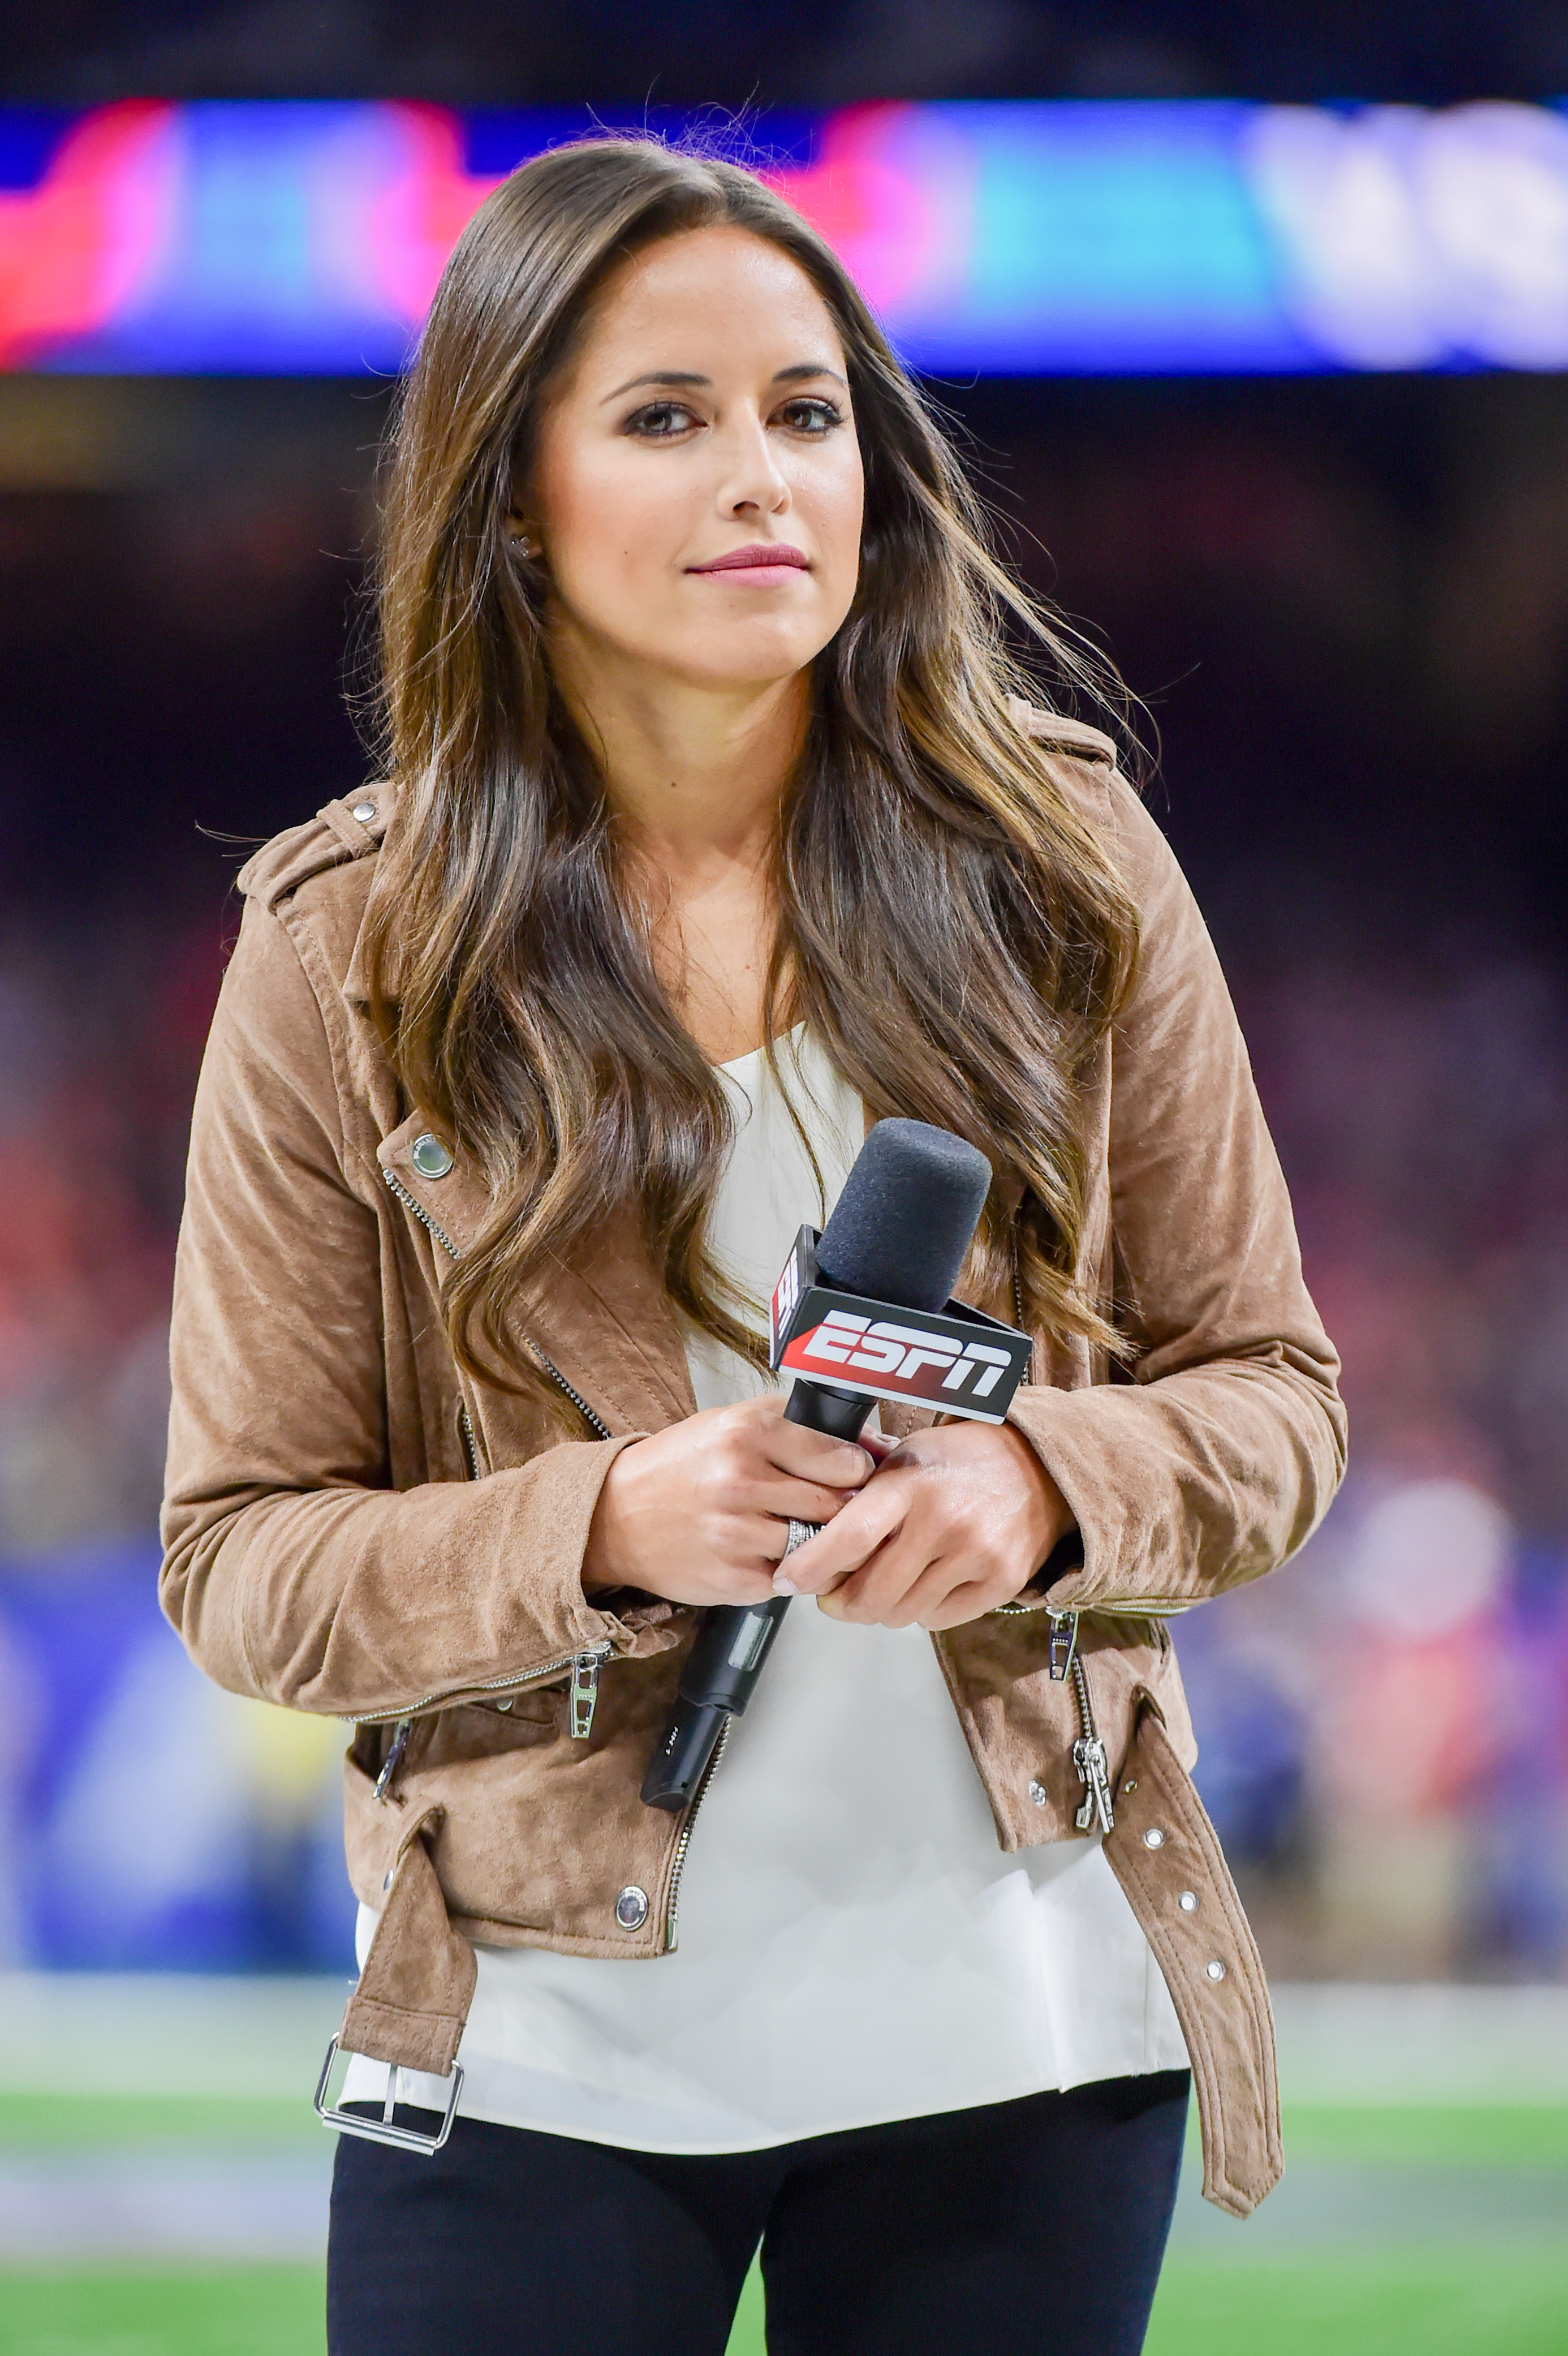 Kaylee Hartung prepares to open the game for the ESPN TV audience before the Sugar Bowl game between the Auburn Tigers and Oklahoma Sooners on January 2, 2017, at the Mercedes-Benz Superdome in New Orleans, Louisiana.  | Source: Getty Images